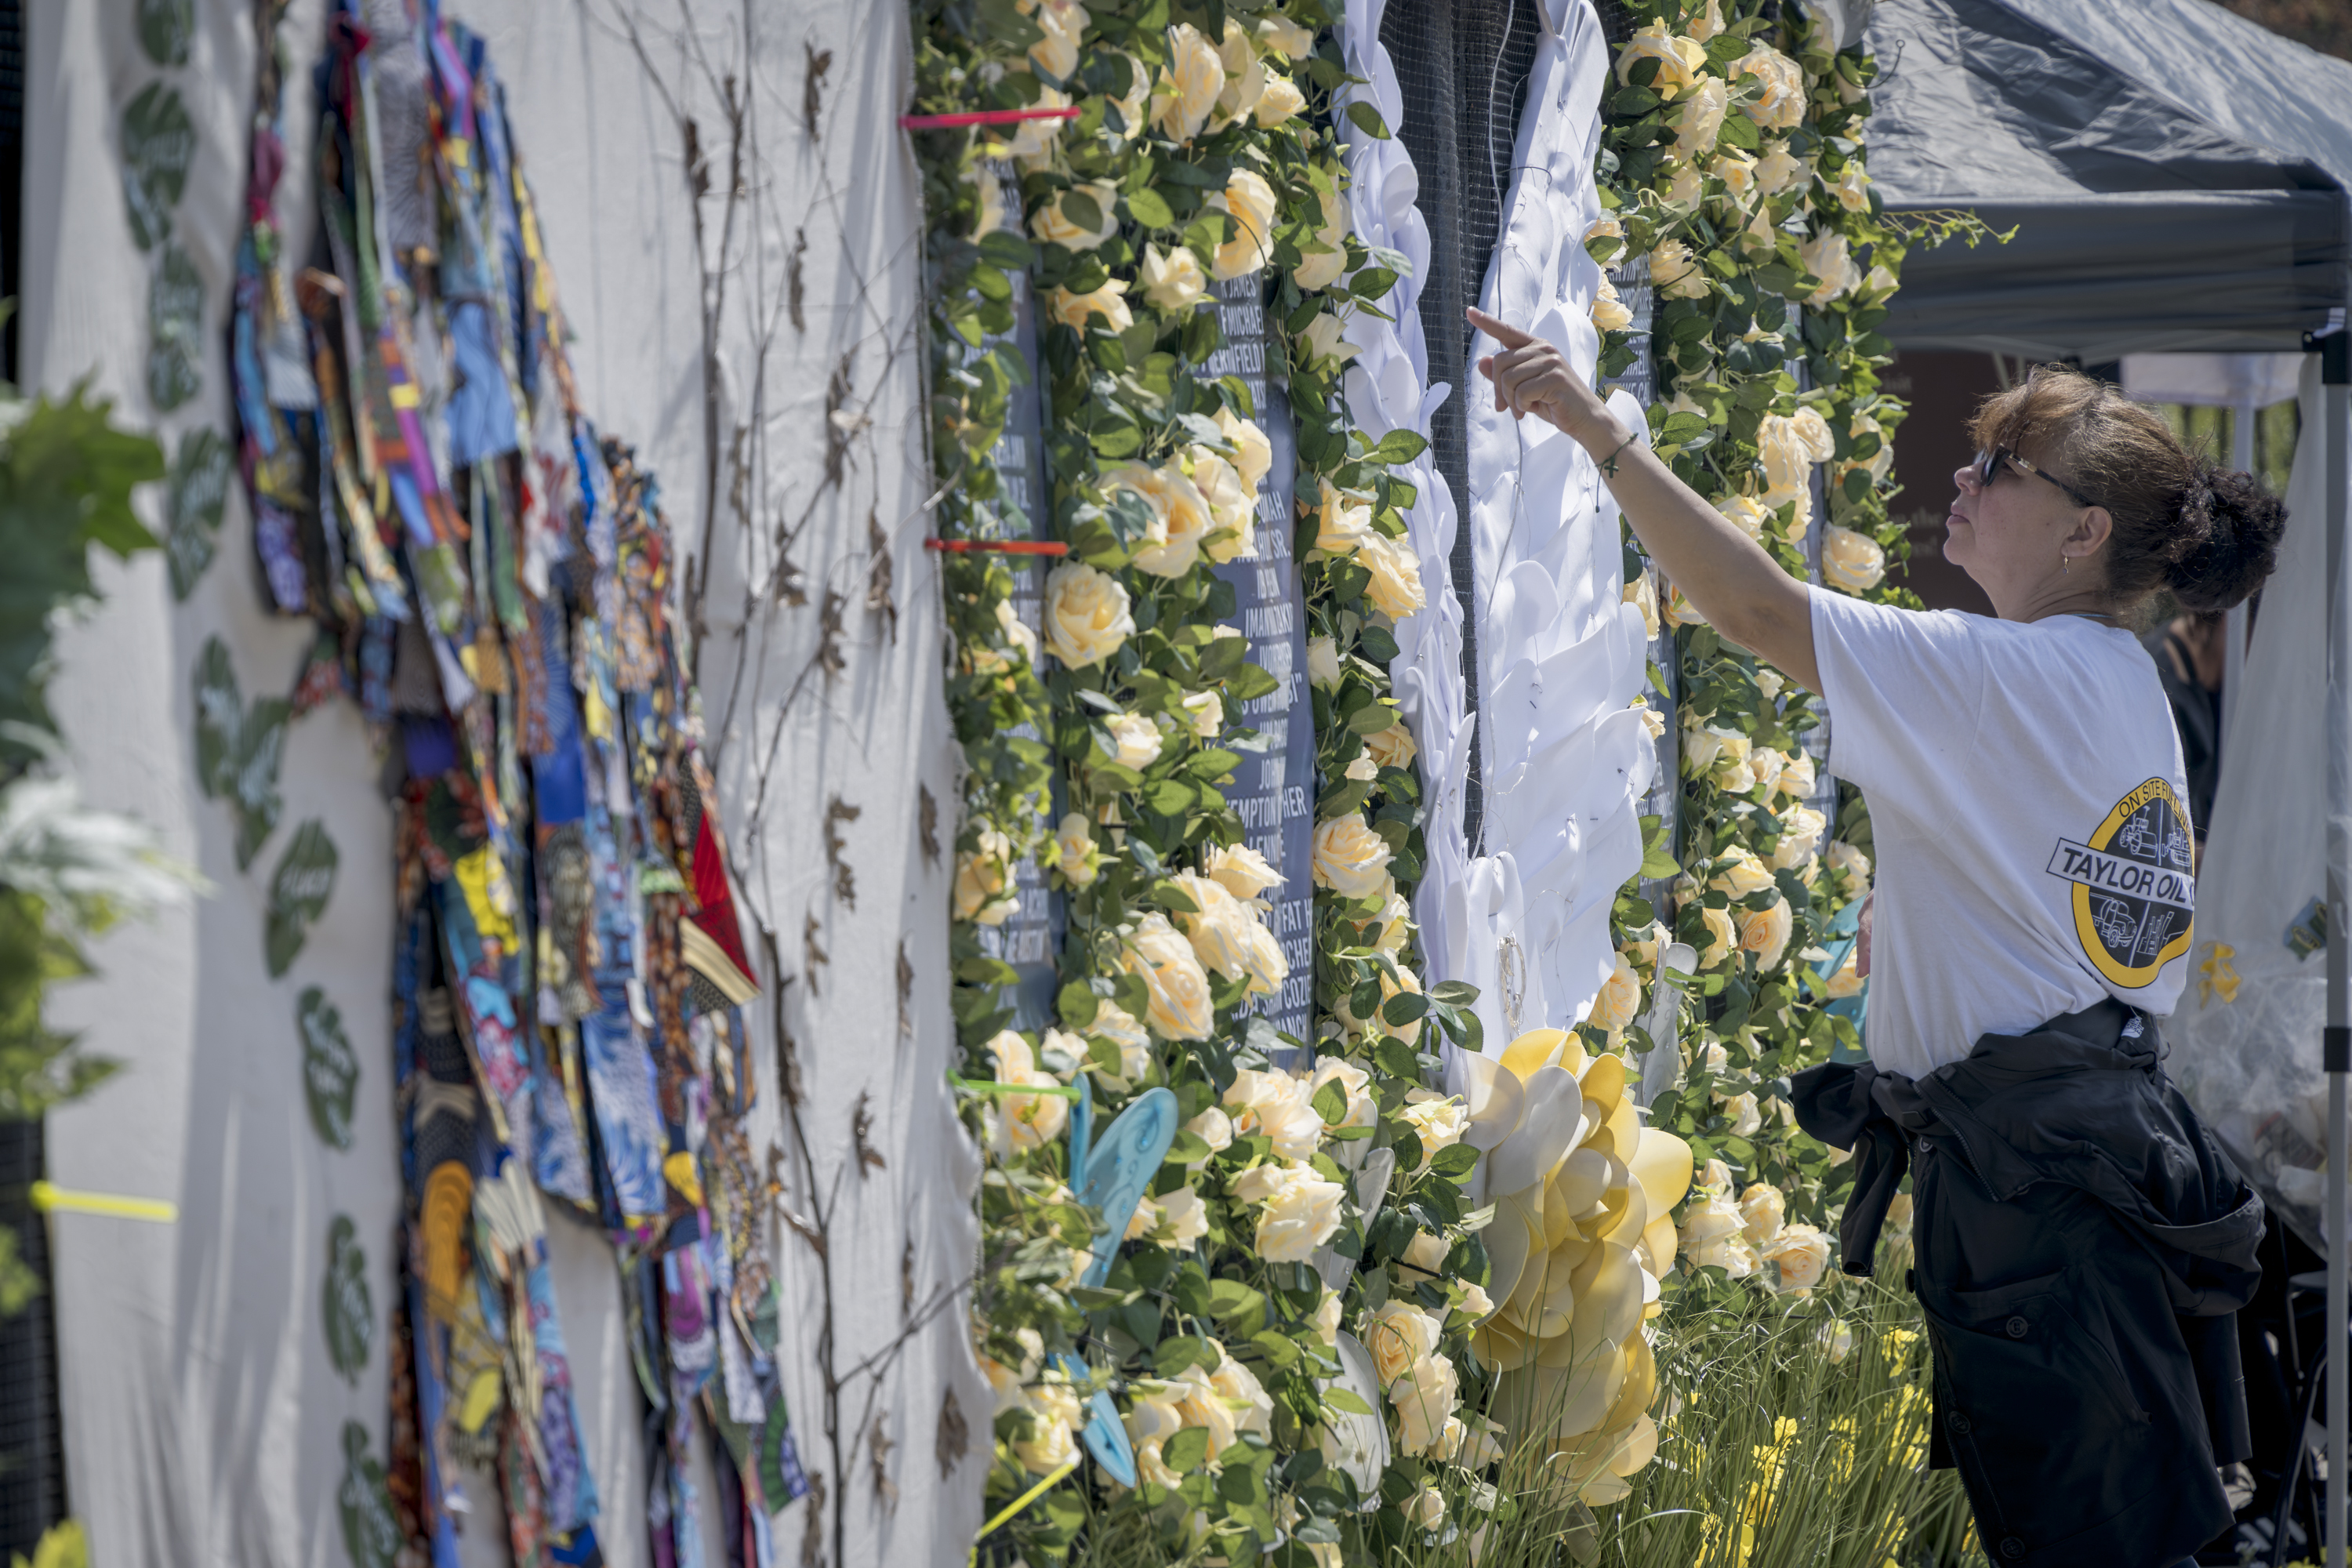 A woman hangs up artwork as part of a COVID memorial.